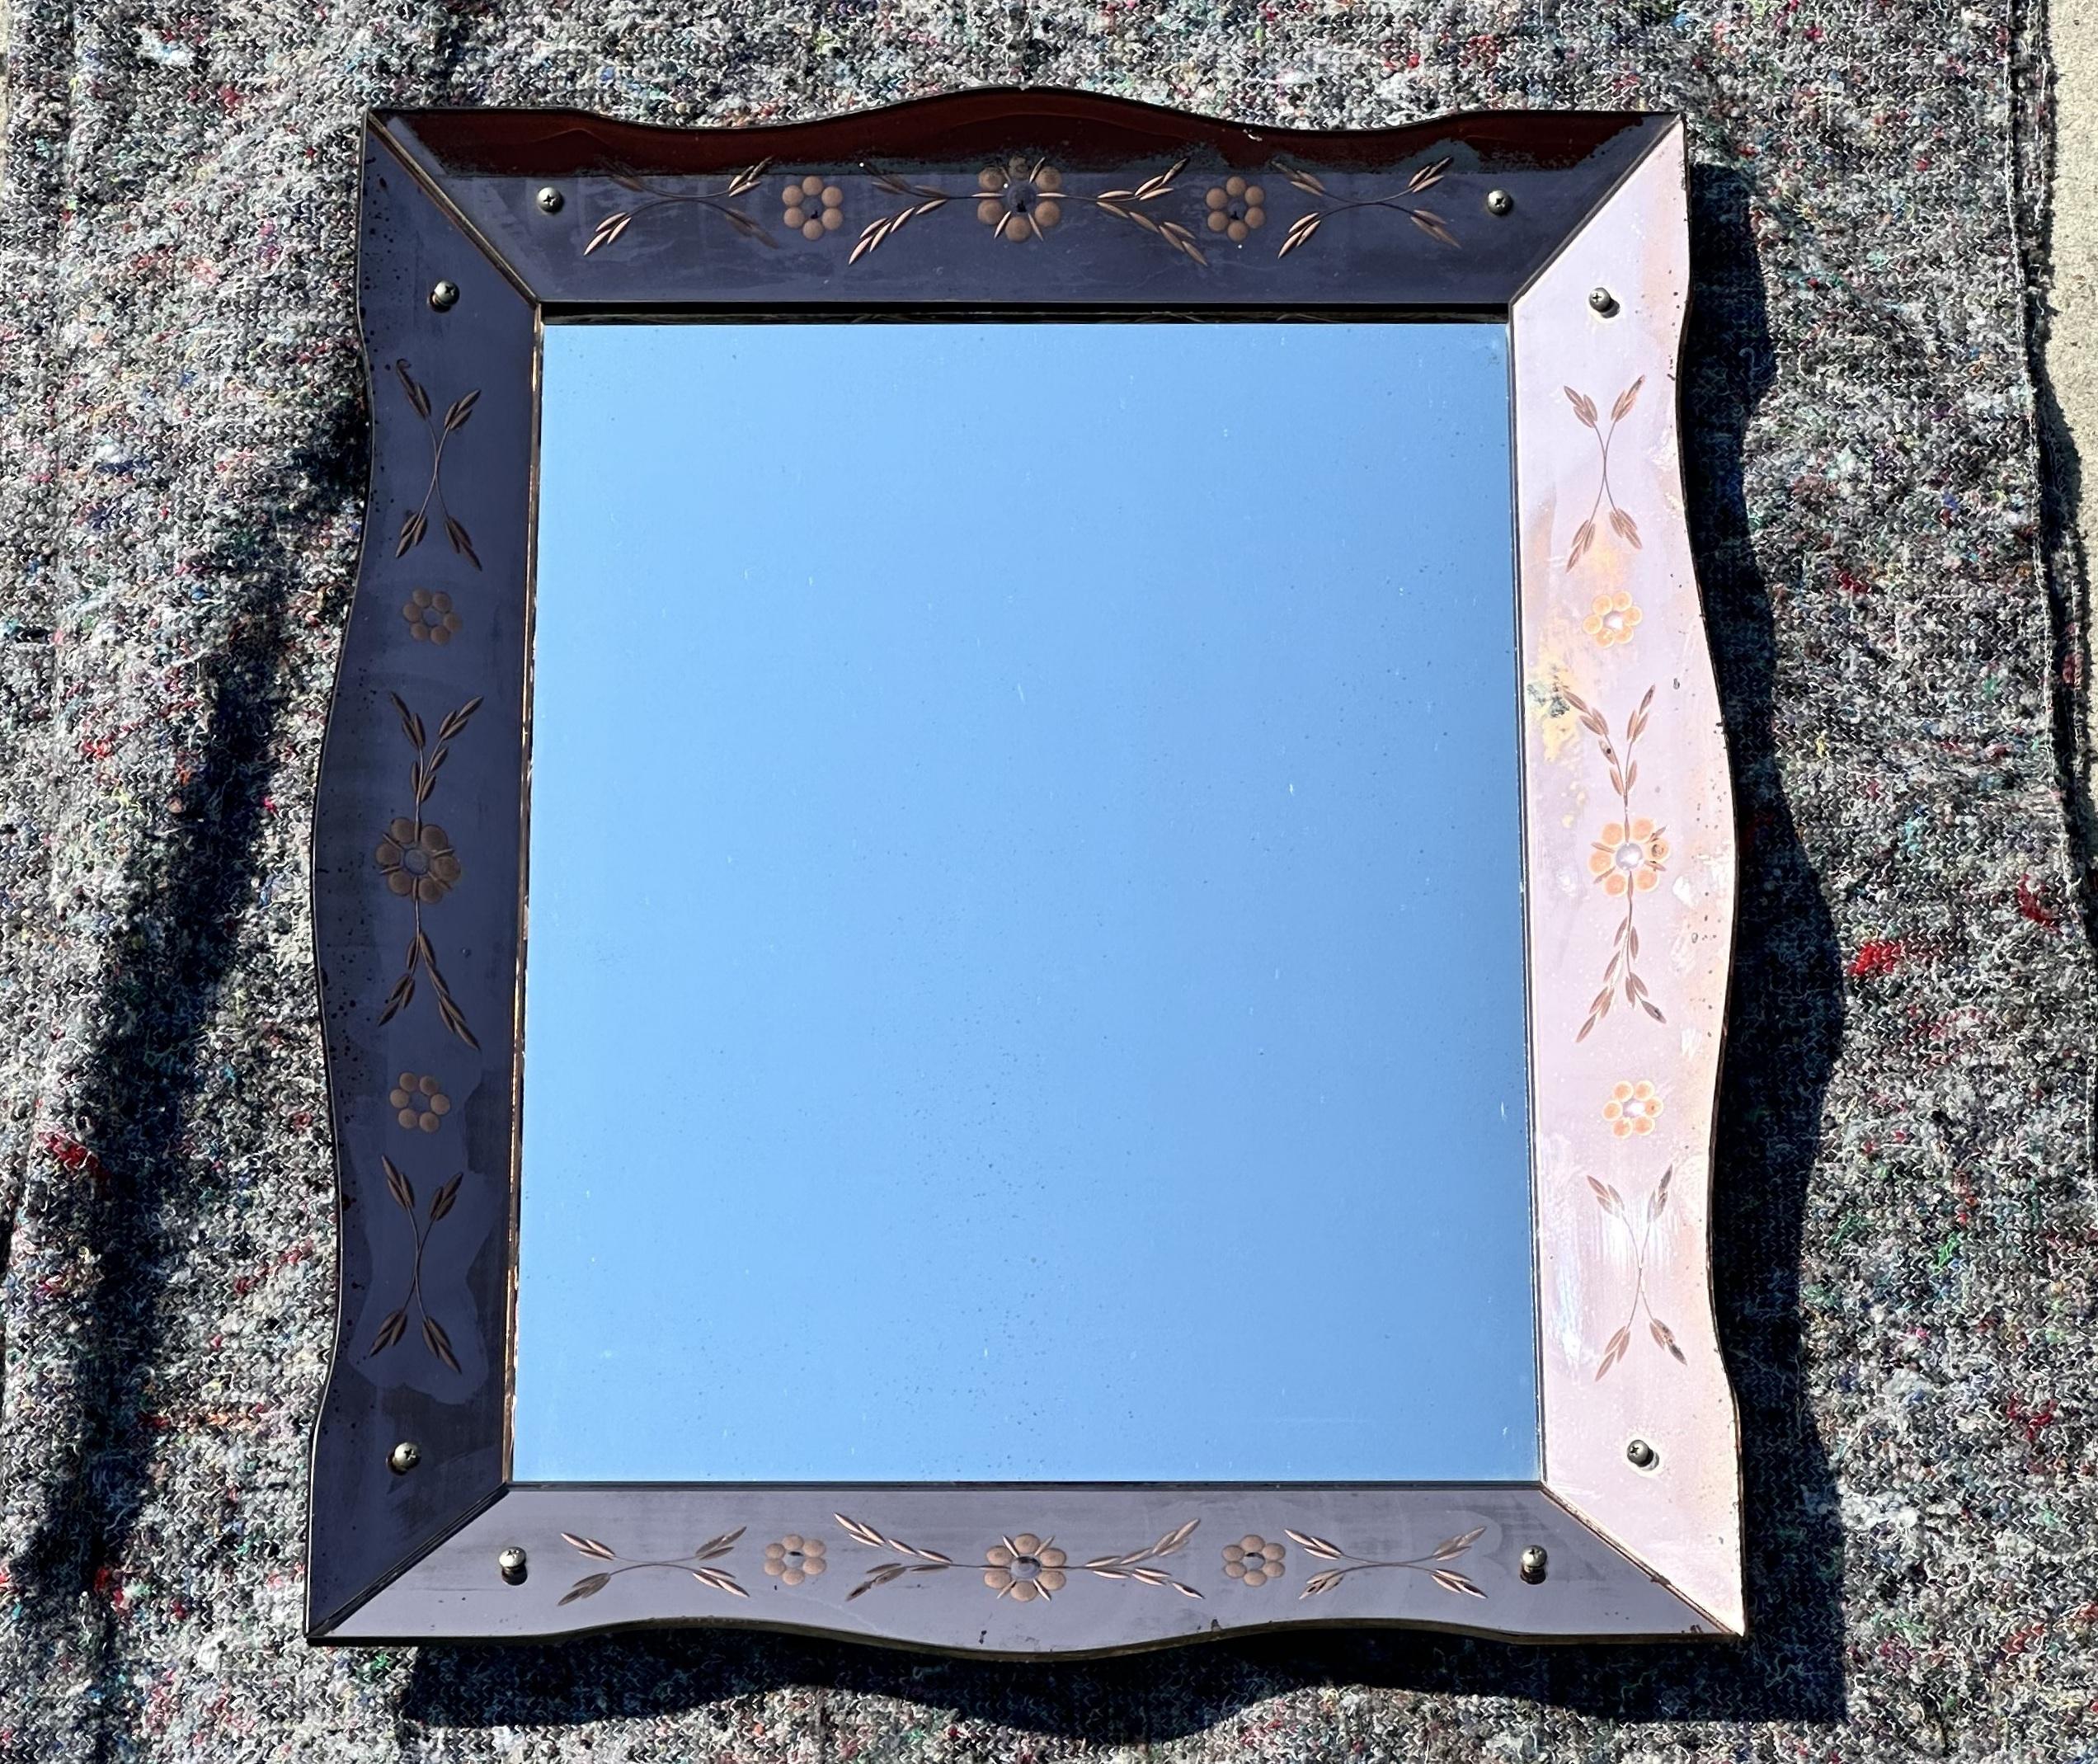 We are delighted to offer for sale absolutely sublime Rose glass Art Deco wall mirror with floral etchings.

This mirror is one of four very rare Art Deco Peach Glass mirrors I have recently acquired, in total there is a large petal framed mirror,